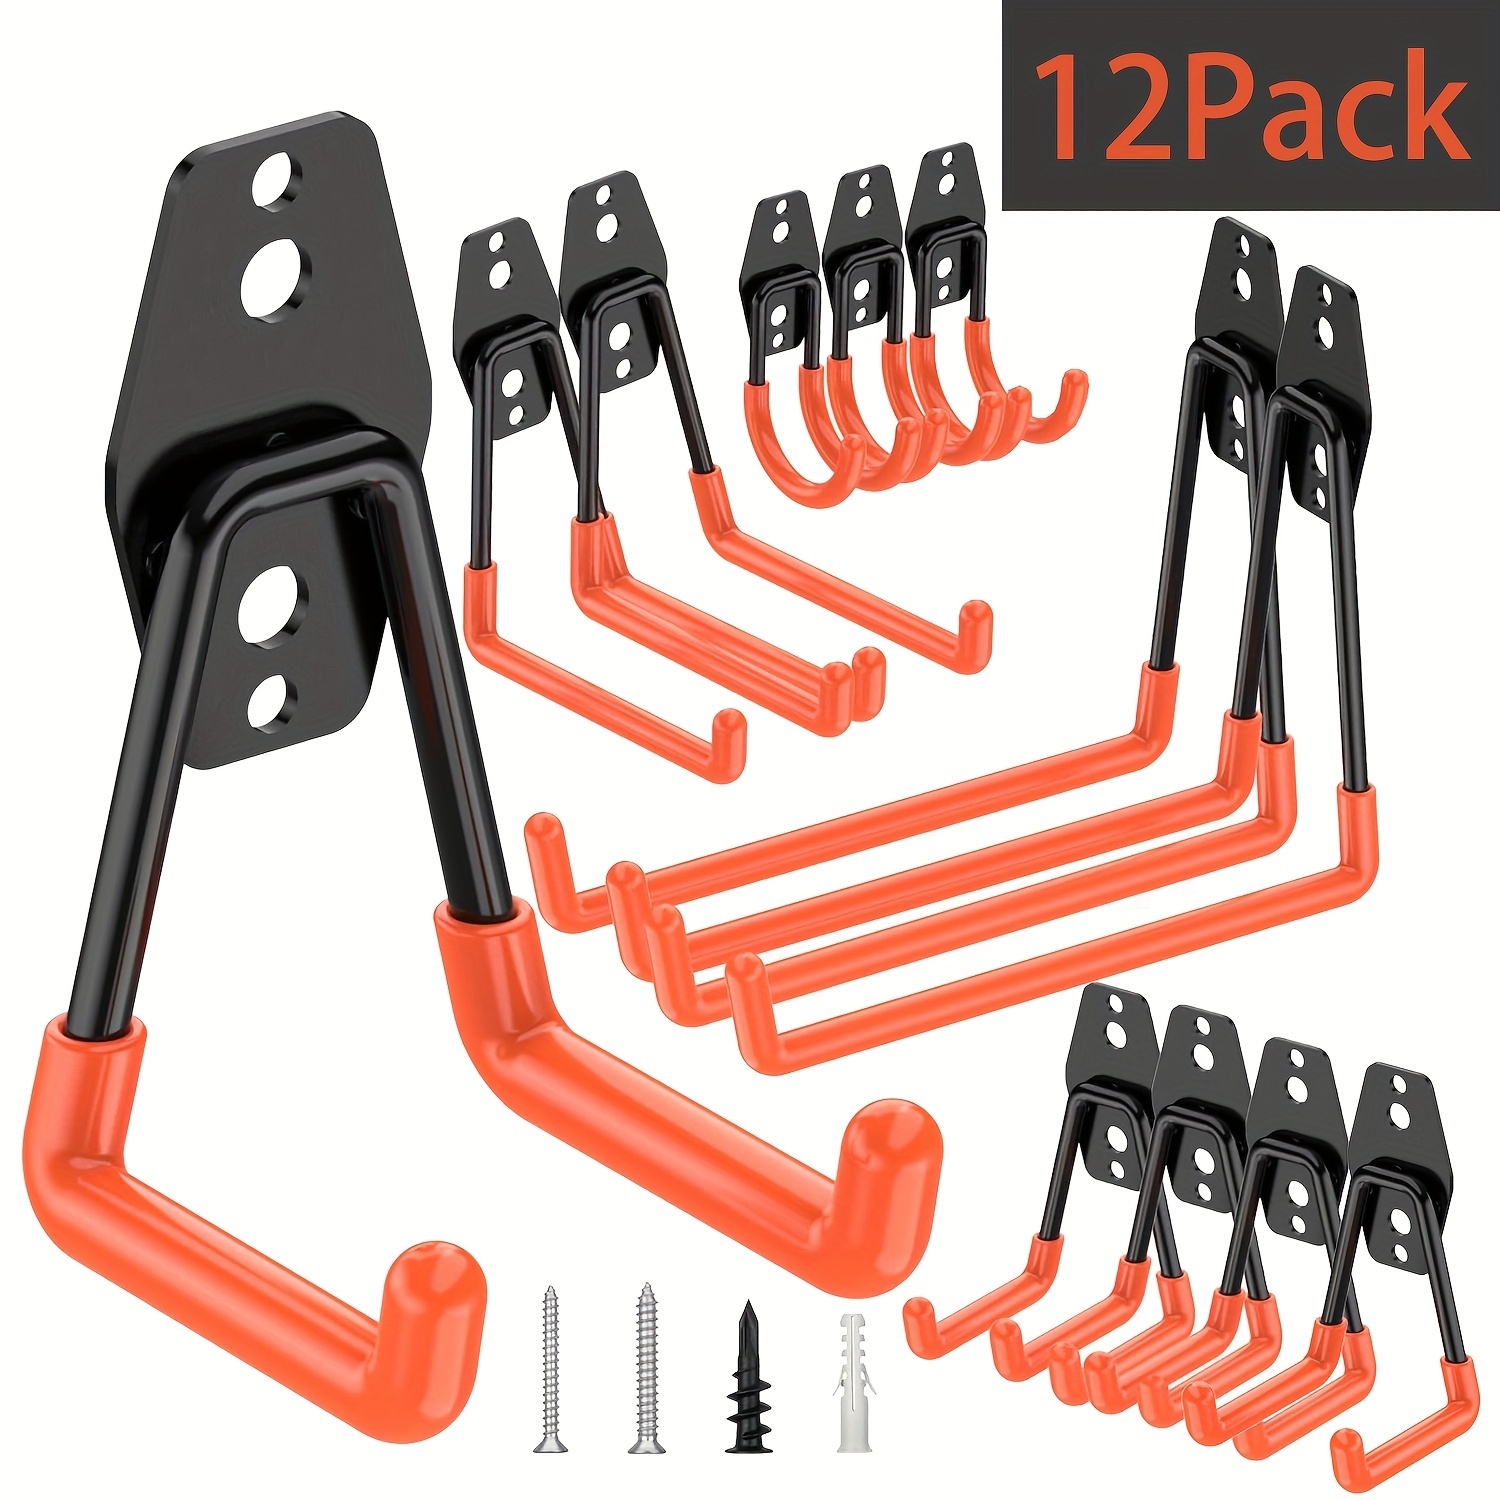 

12pcs Garage Hooks, Heavy Duty, Utility Steel, Storage Hooks, Wall Mount, Organize Power Tools, Ladders, Bulk Items, Bicycles, Ropes And More Equipment